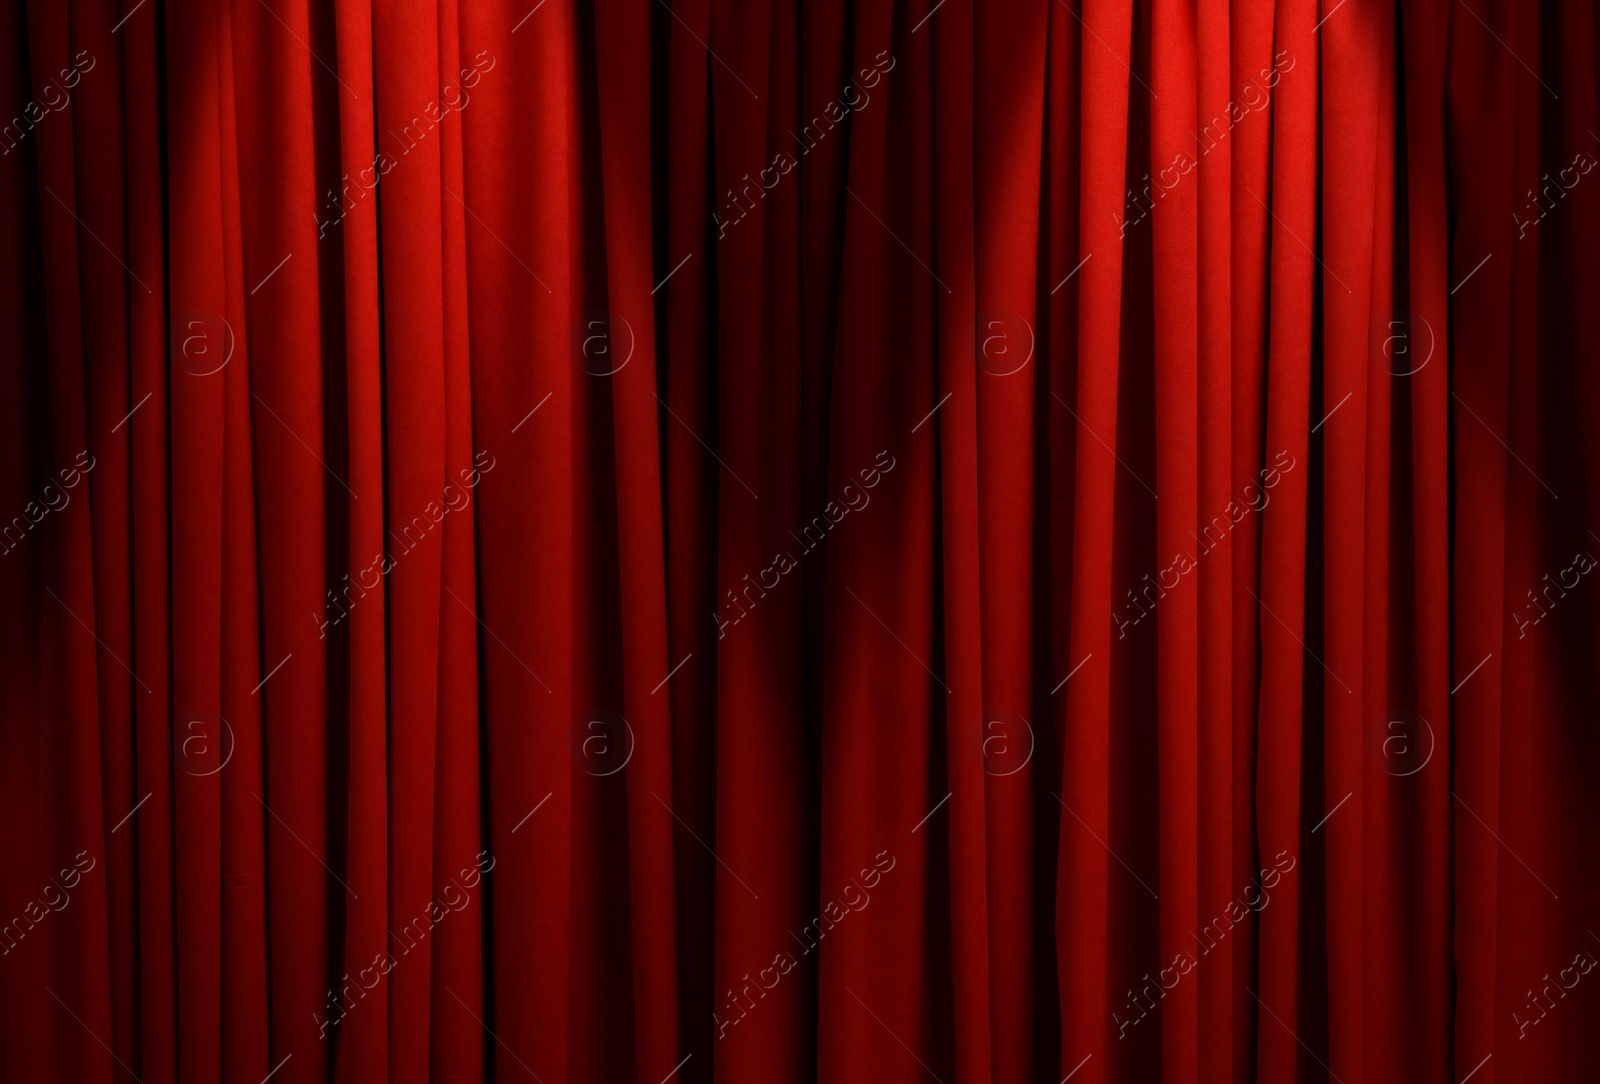 Image of Spotlights illuminating closed red stage curtains. Start of performance 